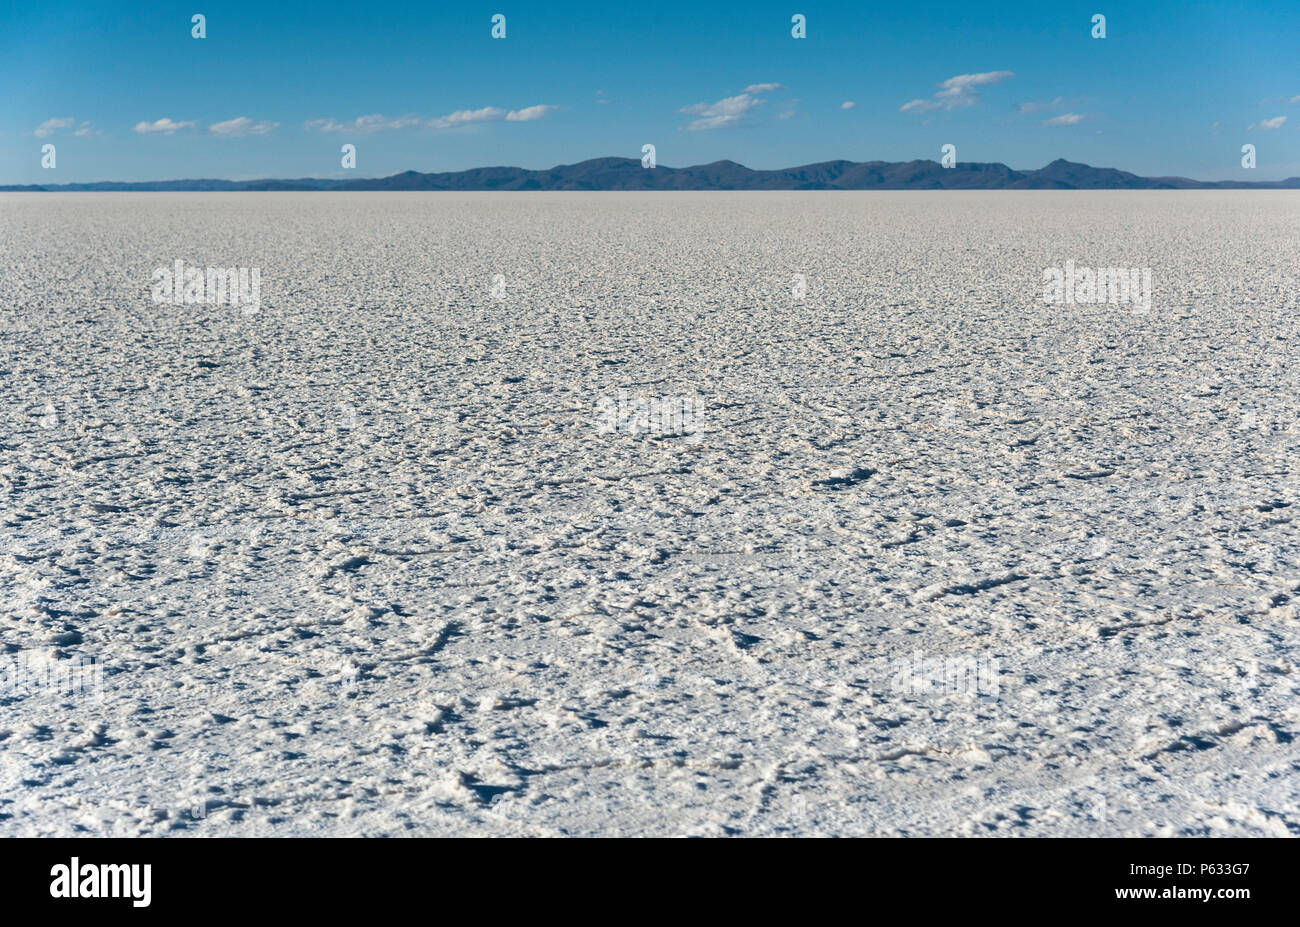 largest salt flats in the world